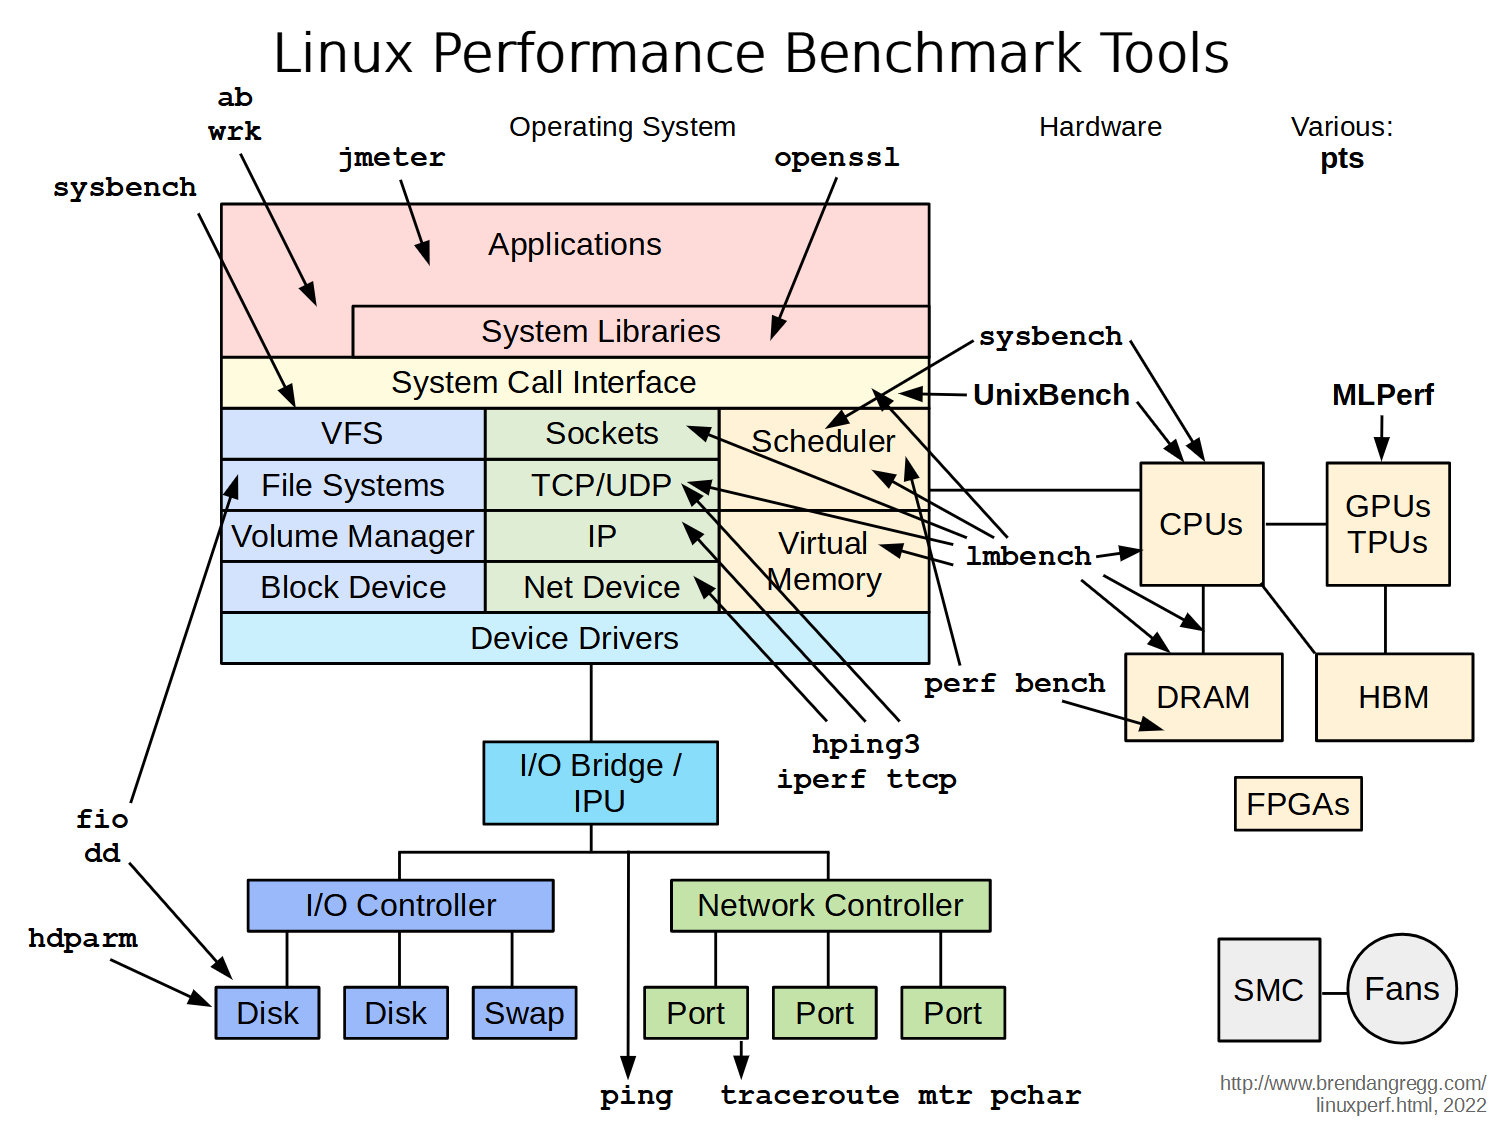 http://www.brendangregg.com/Perf/linux_benchmarking_tools.png